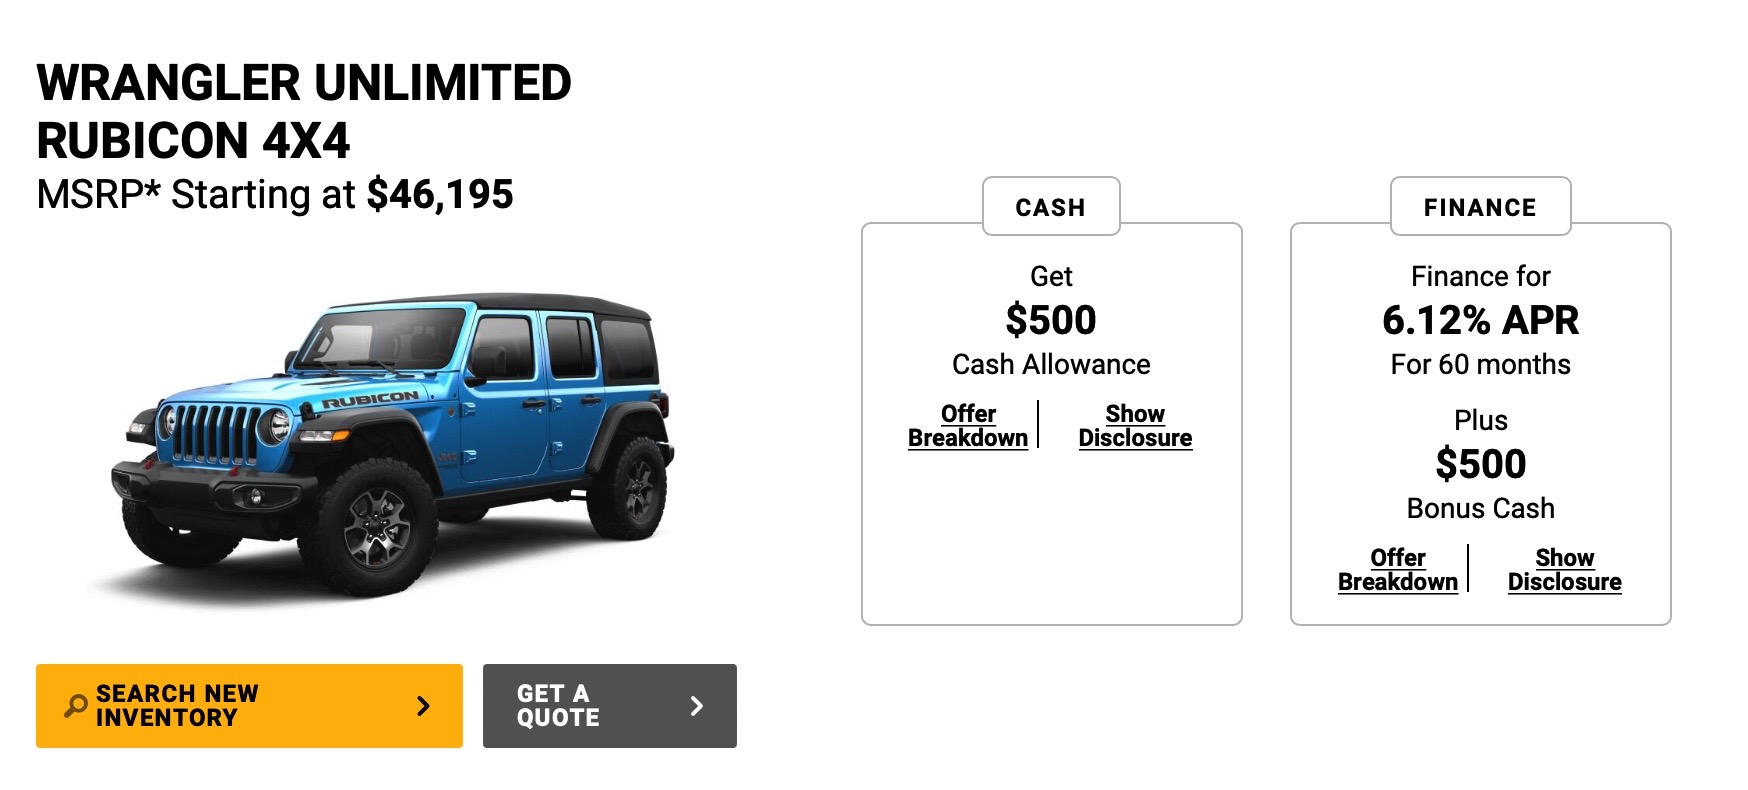 HOW Bad Are Things Getting In The Car Business? Check Out The BRANDON  Inspired SPECIALS From Jeep - AutoSpies Auto News